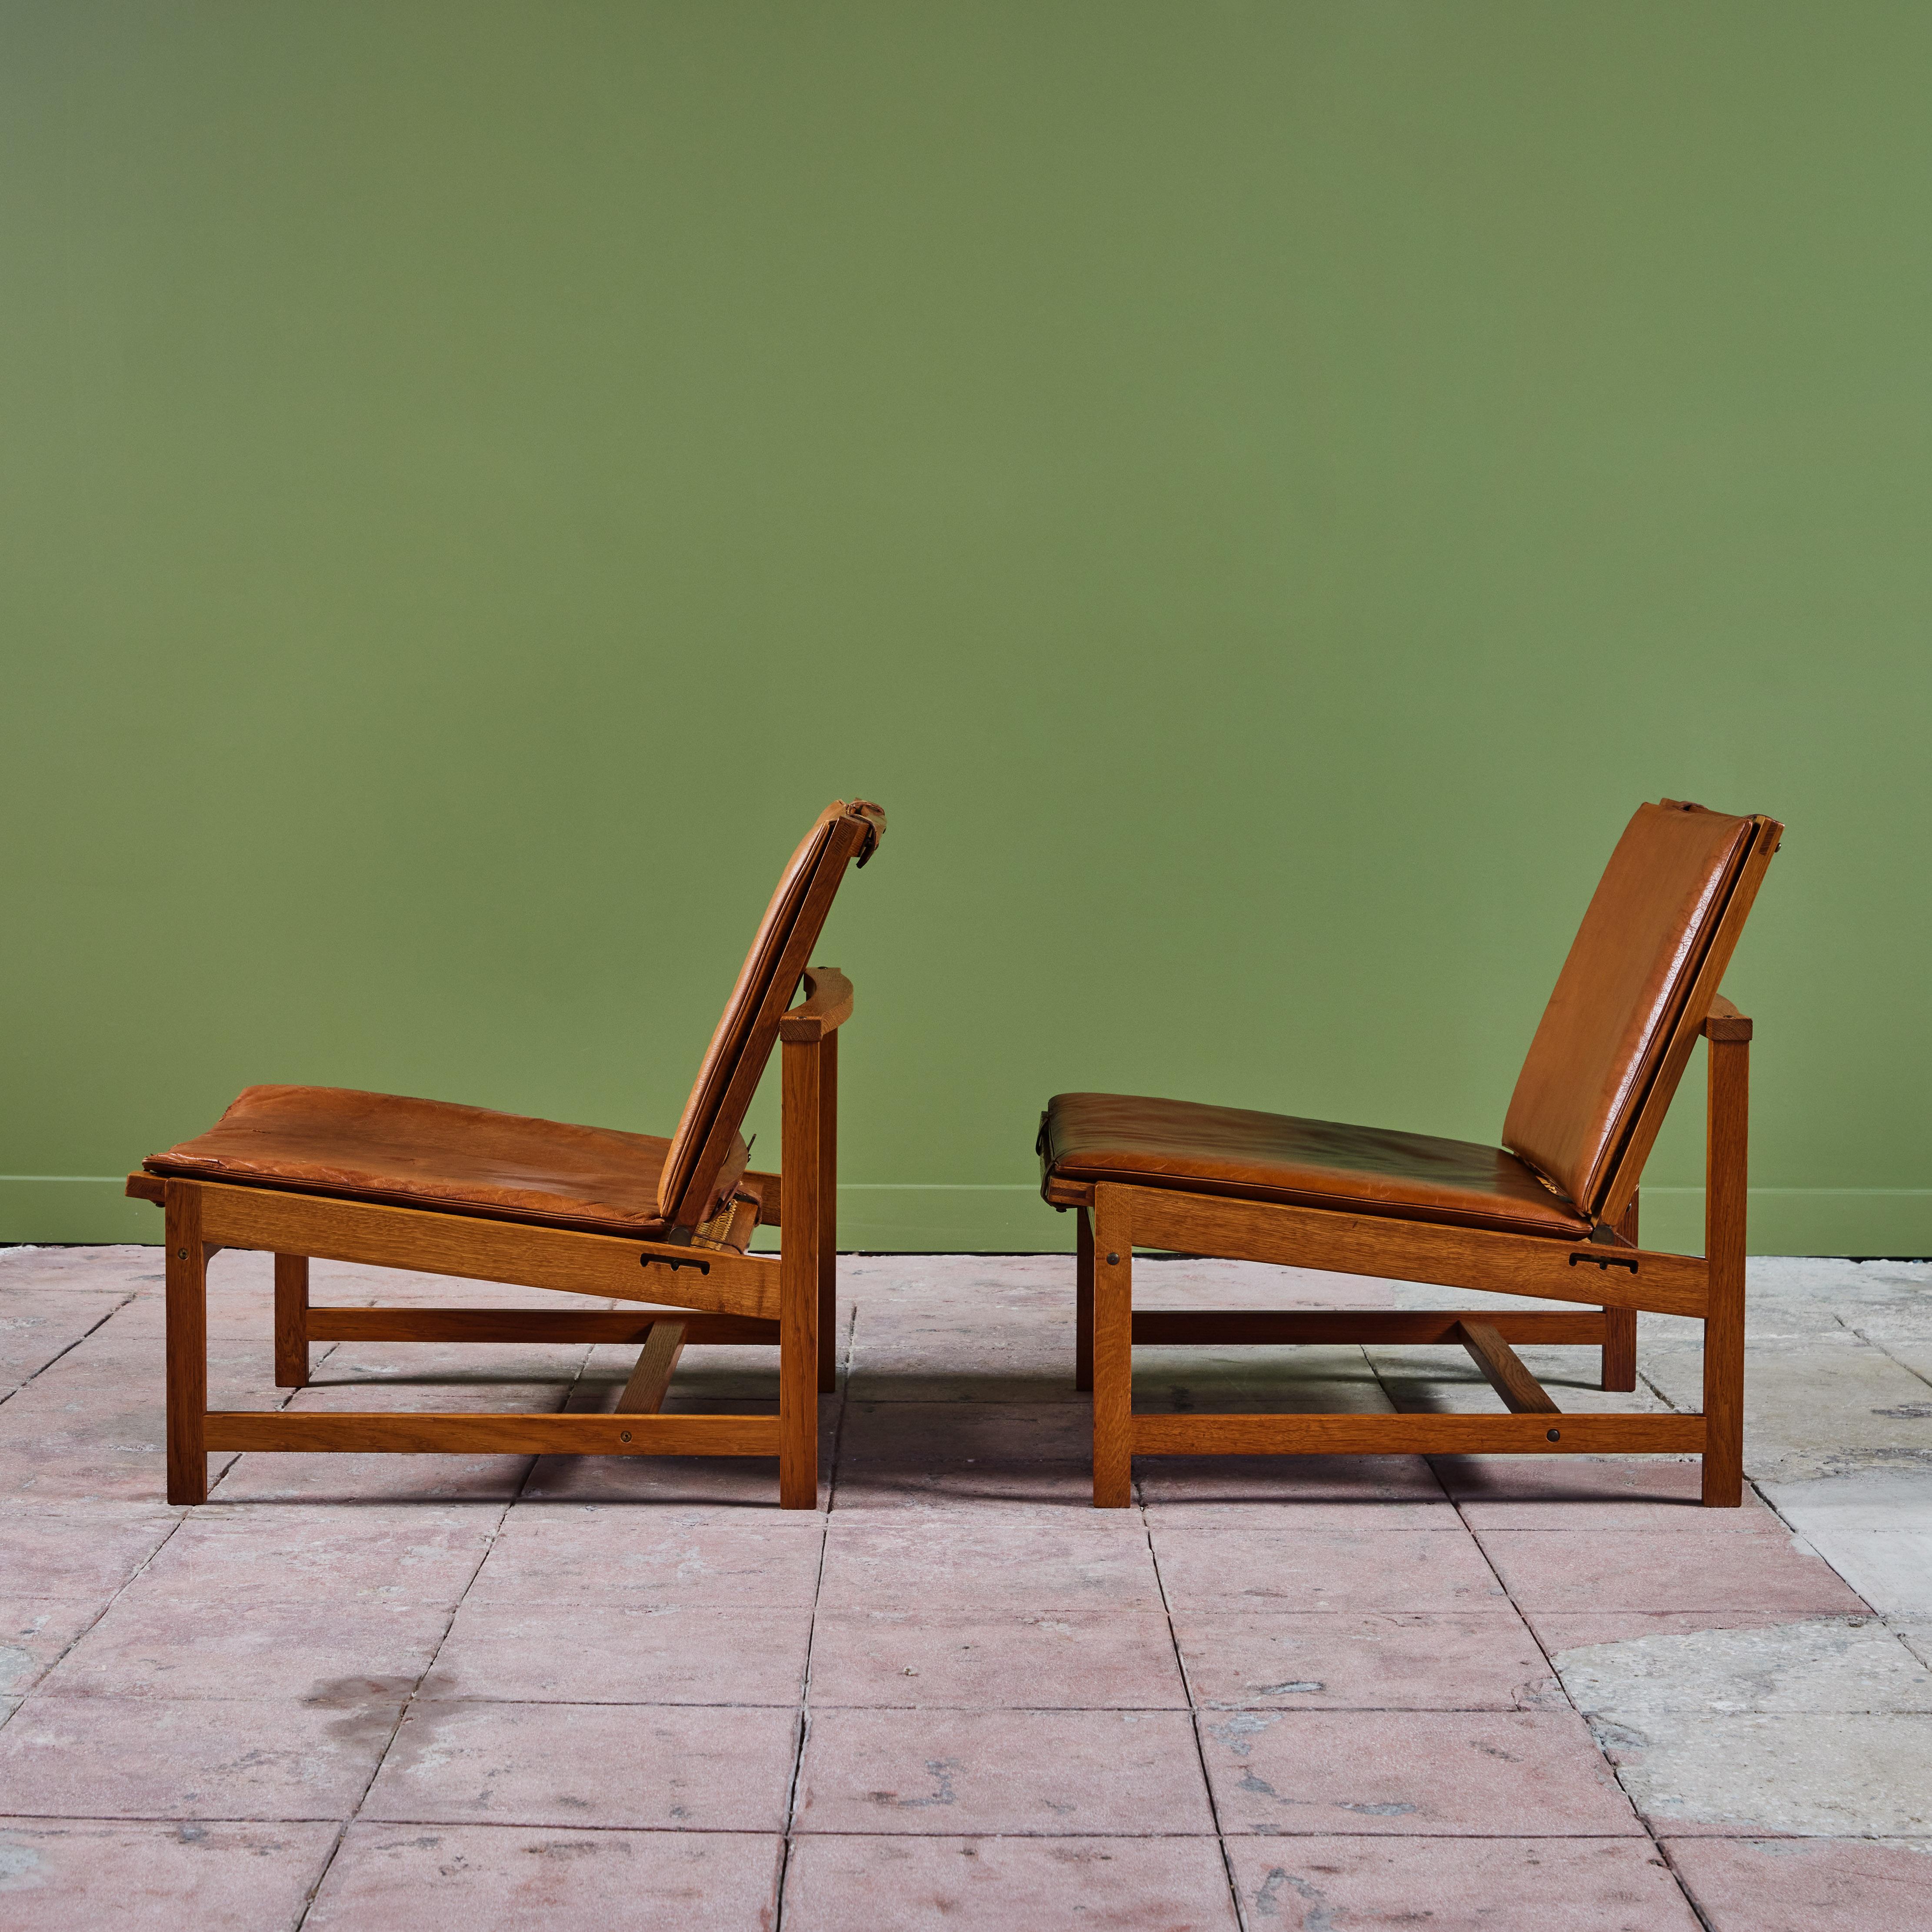 Mid-20th Century Pair of Arne Karlsen and Peter Hjort Leather and Cane Lounge Chairs